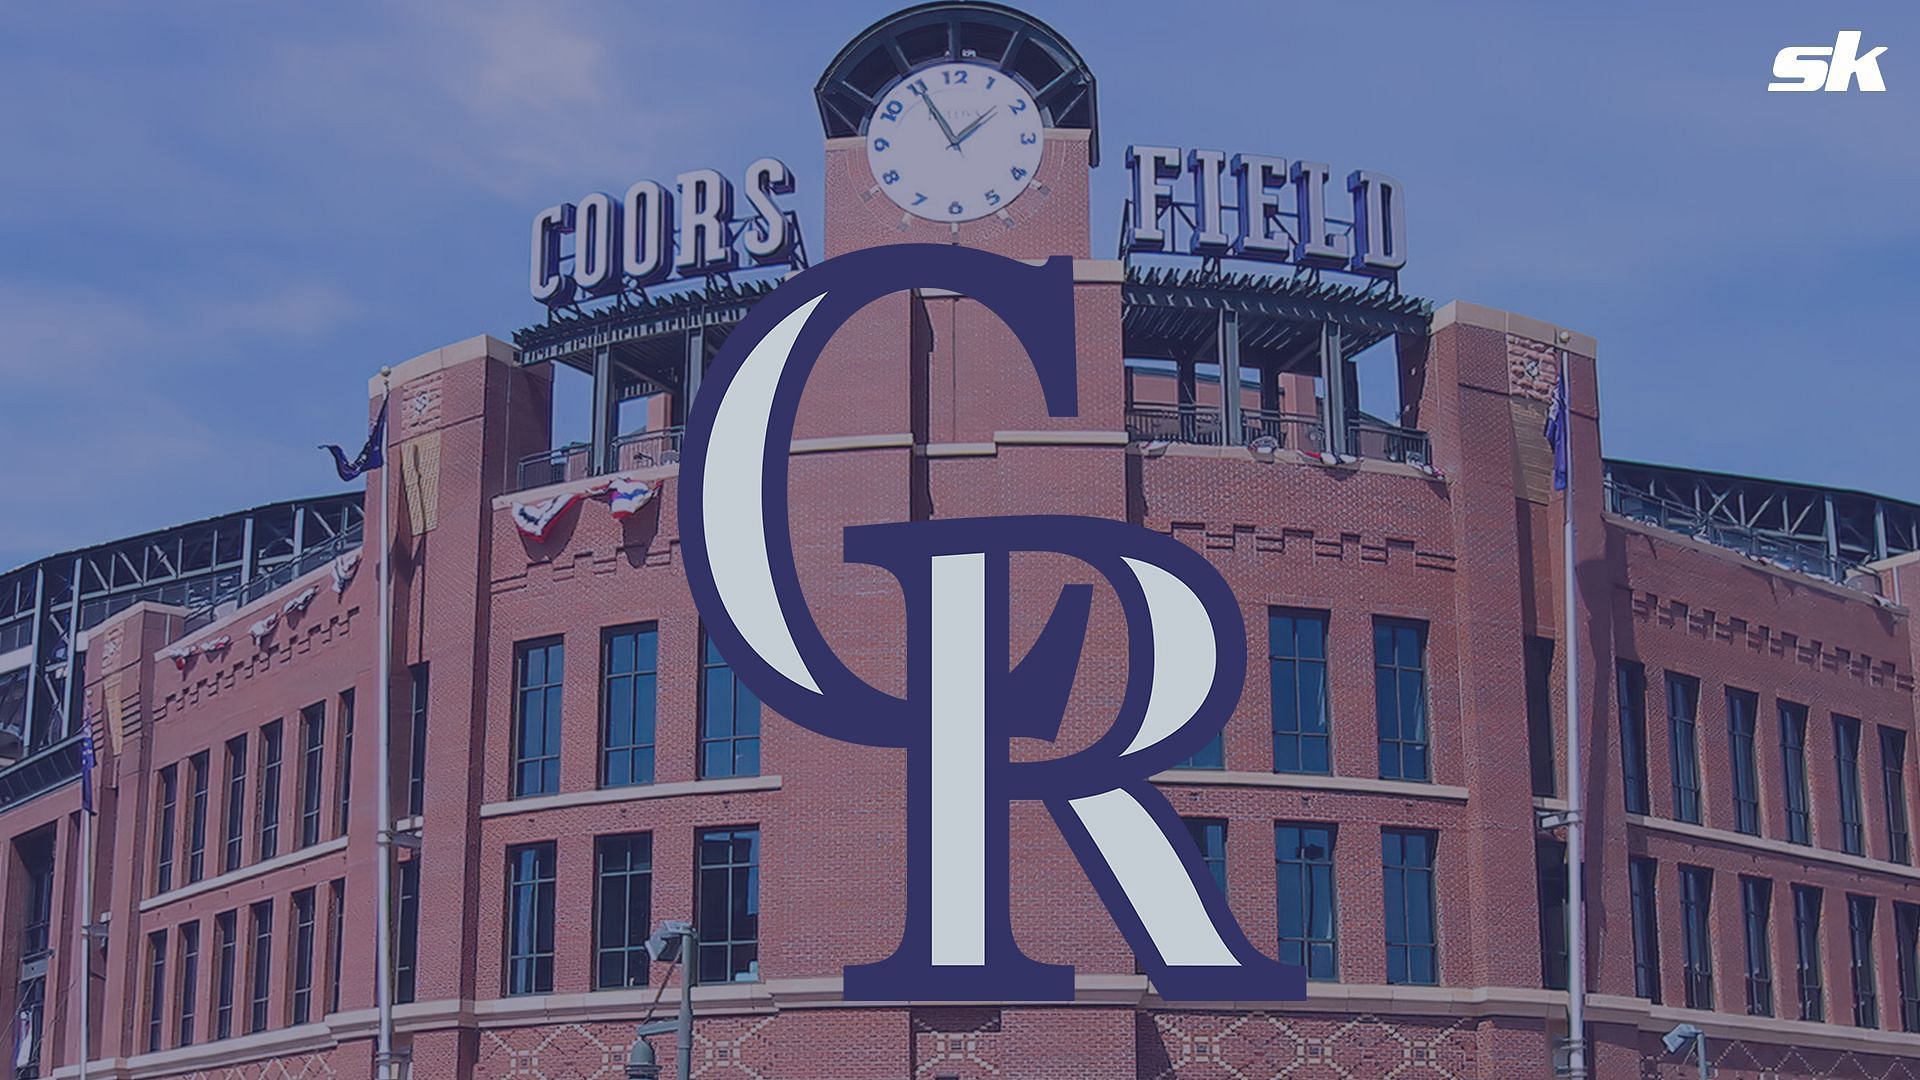 Coors Field in Denver, Colorado represents one of the more unique playing spaces in MLB